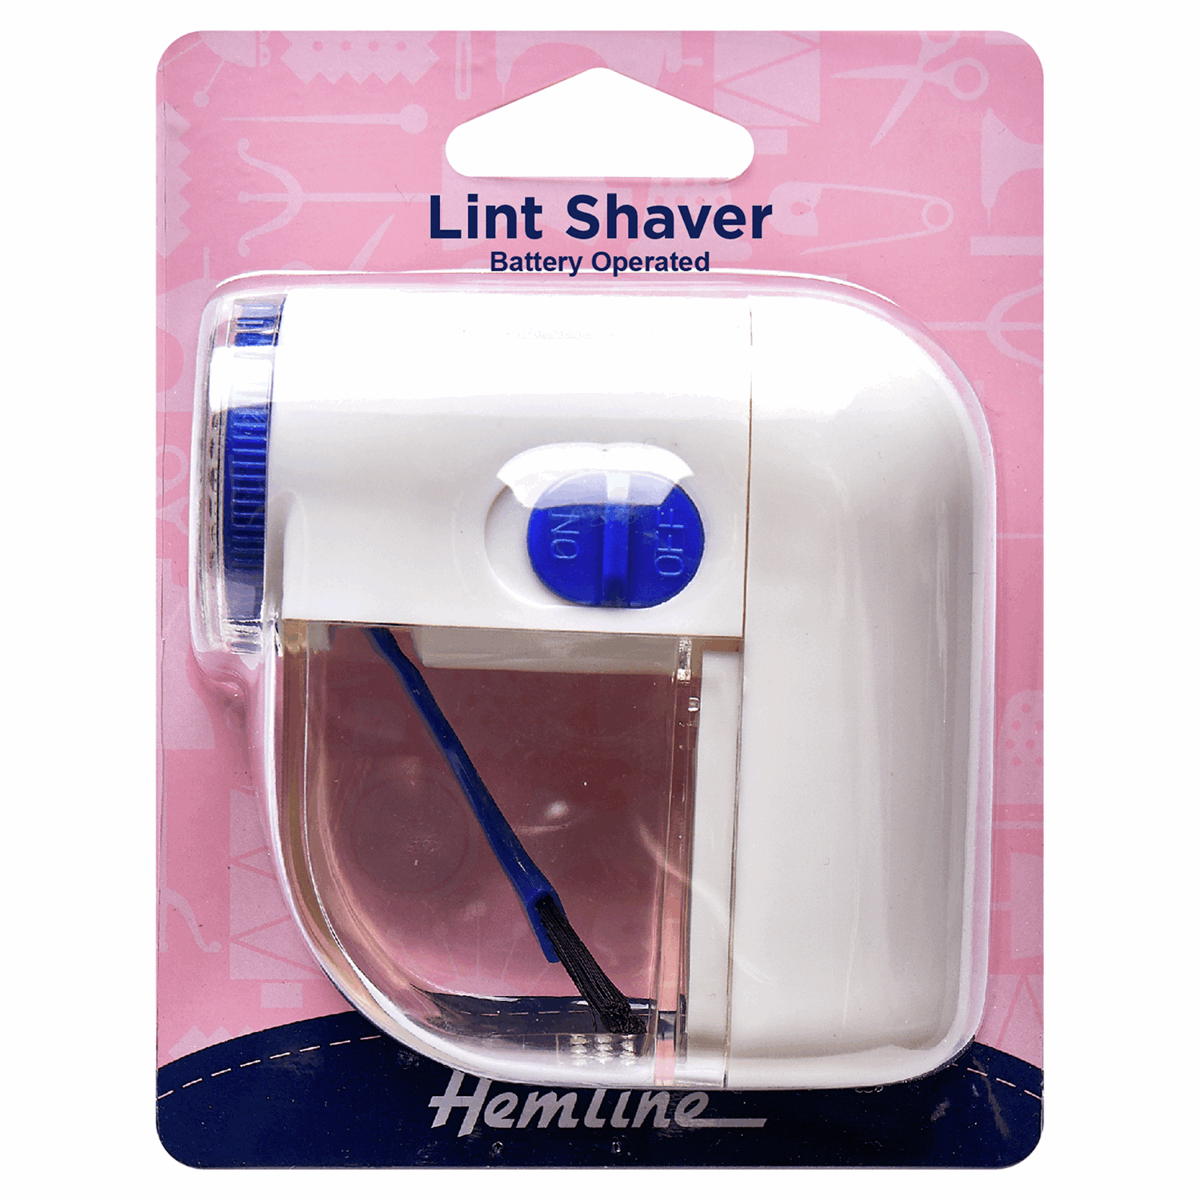 LINT SHAVER - BATTERY OPERATED